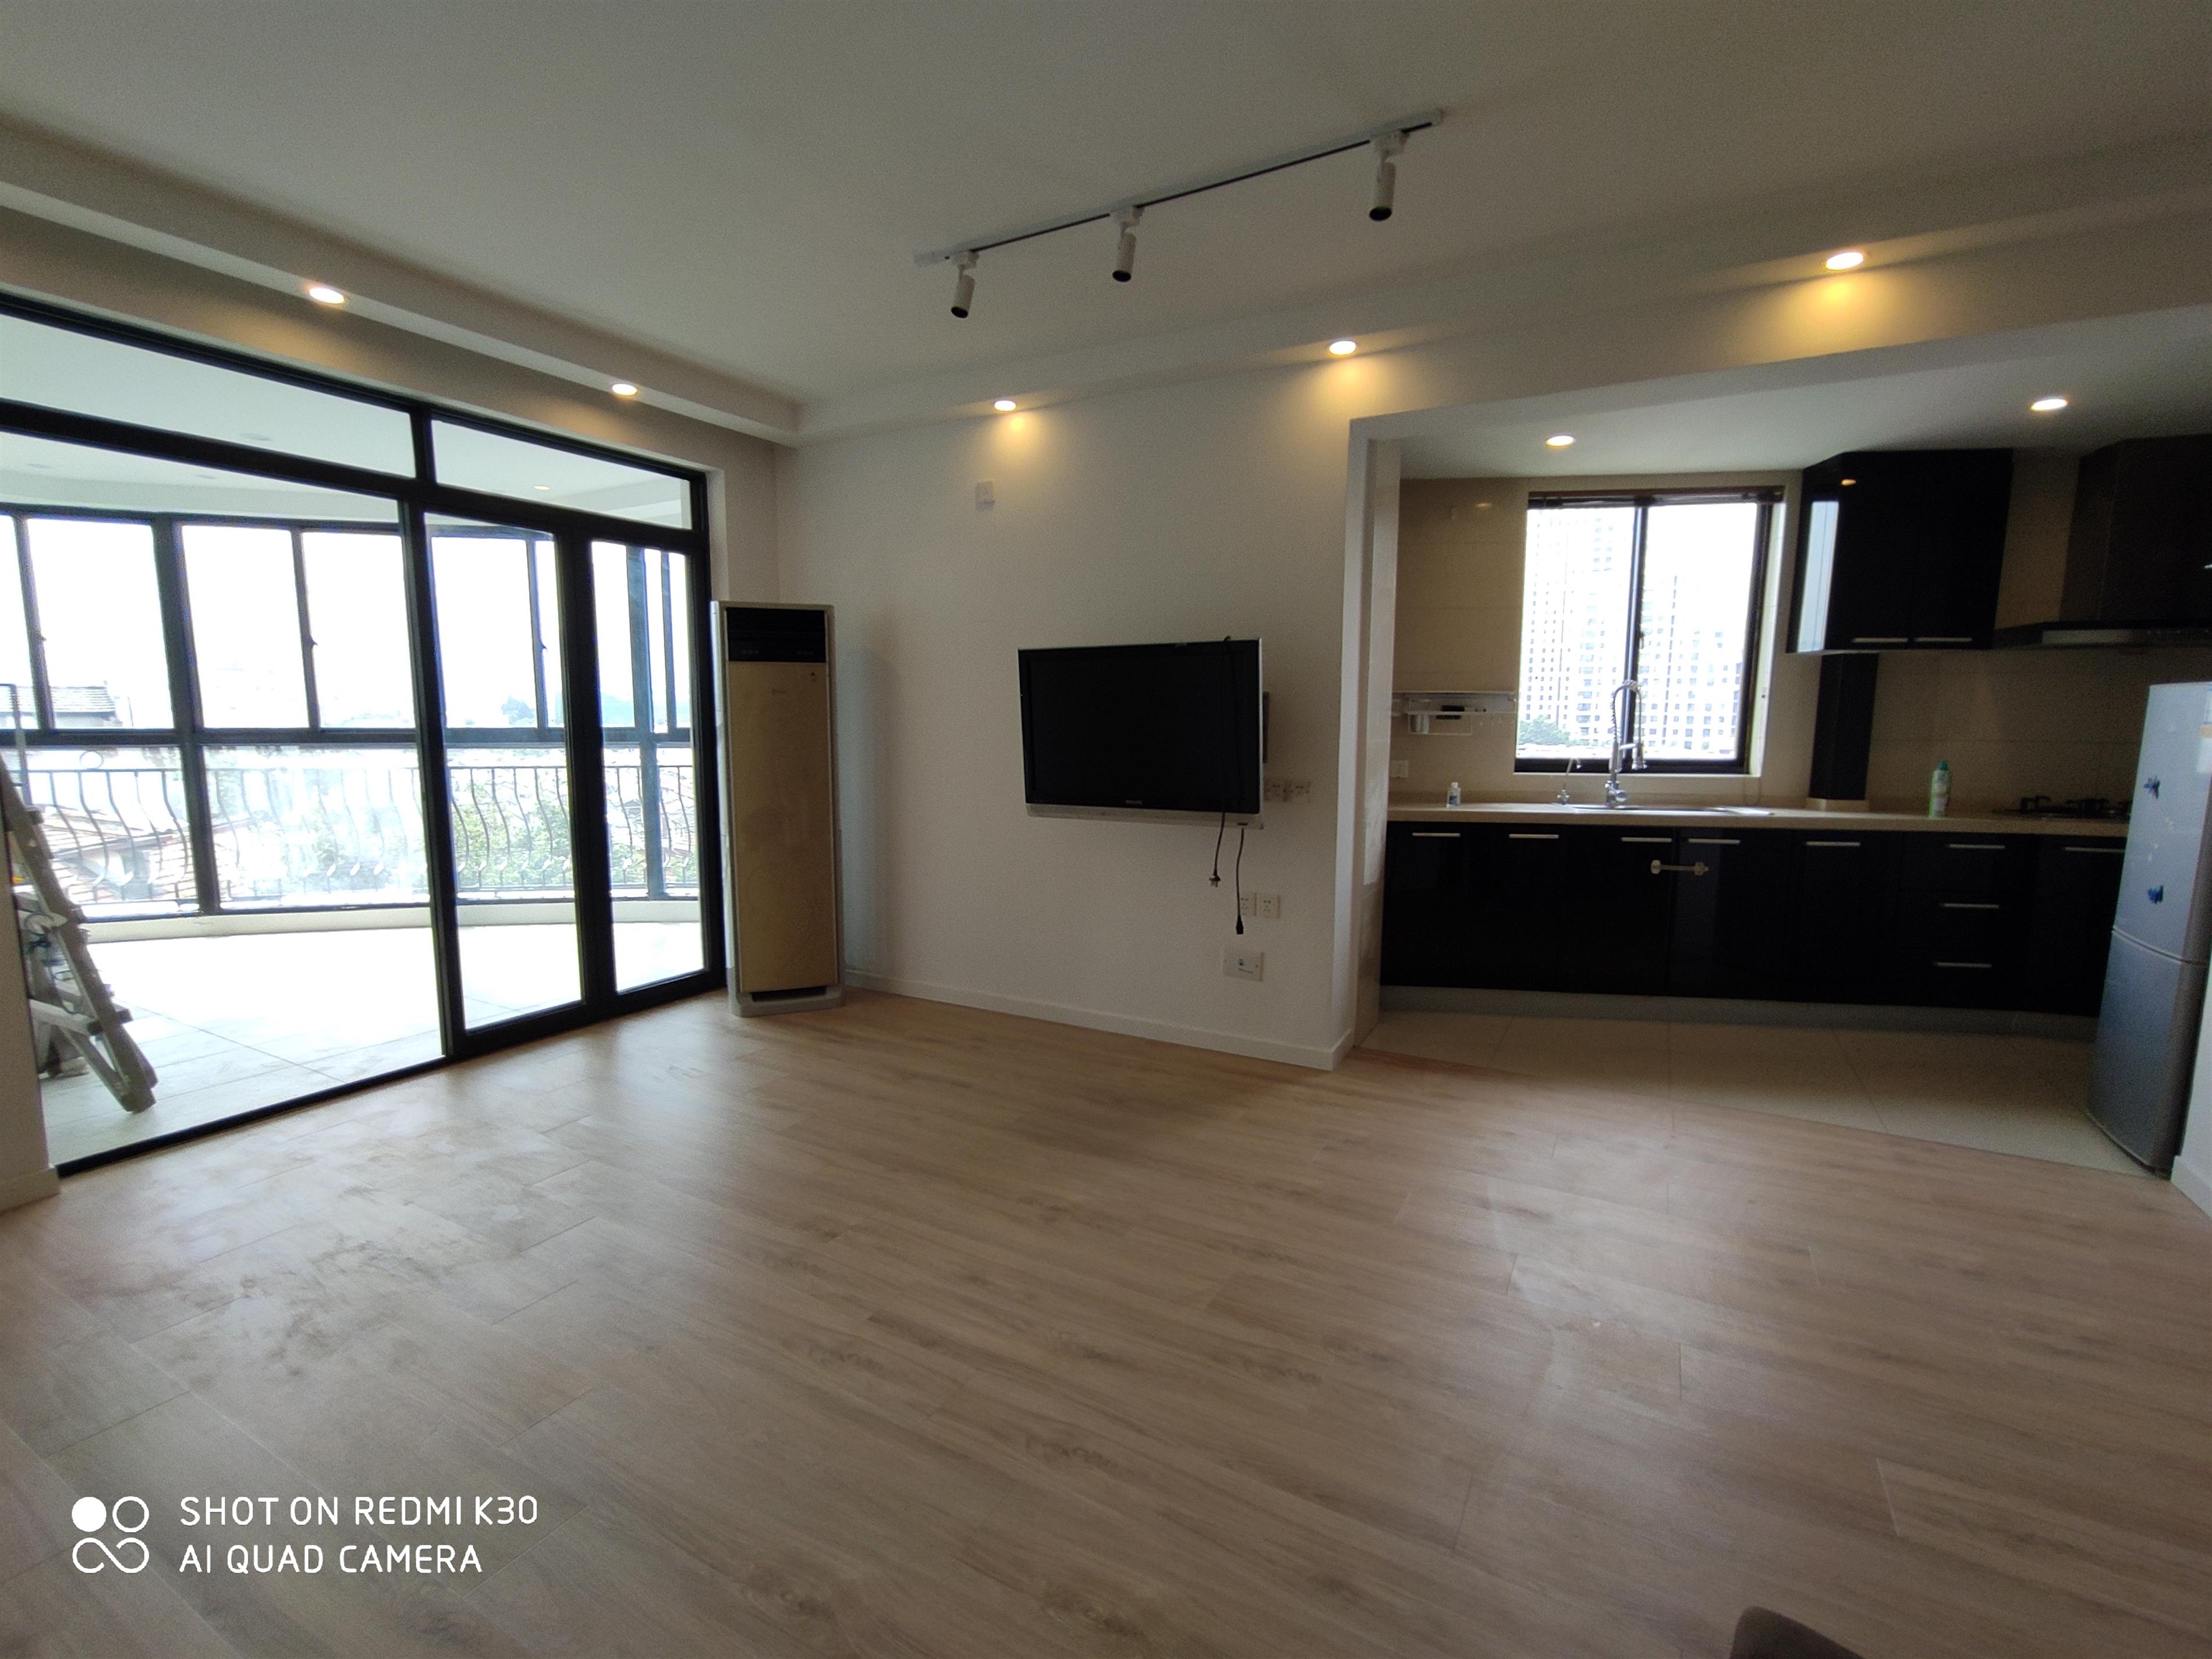 new floors Newly Renovated Spacious Convenient 3BR FFC Apartment nr LN 8/9/10/13 for Rent in Shanghai